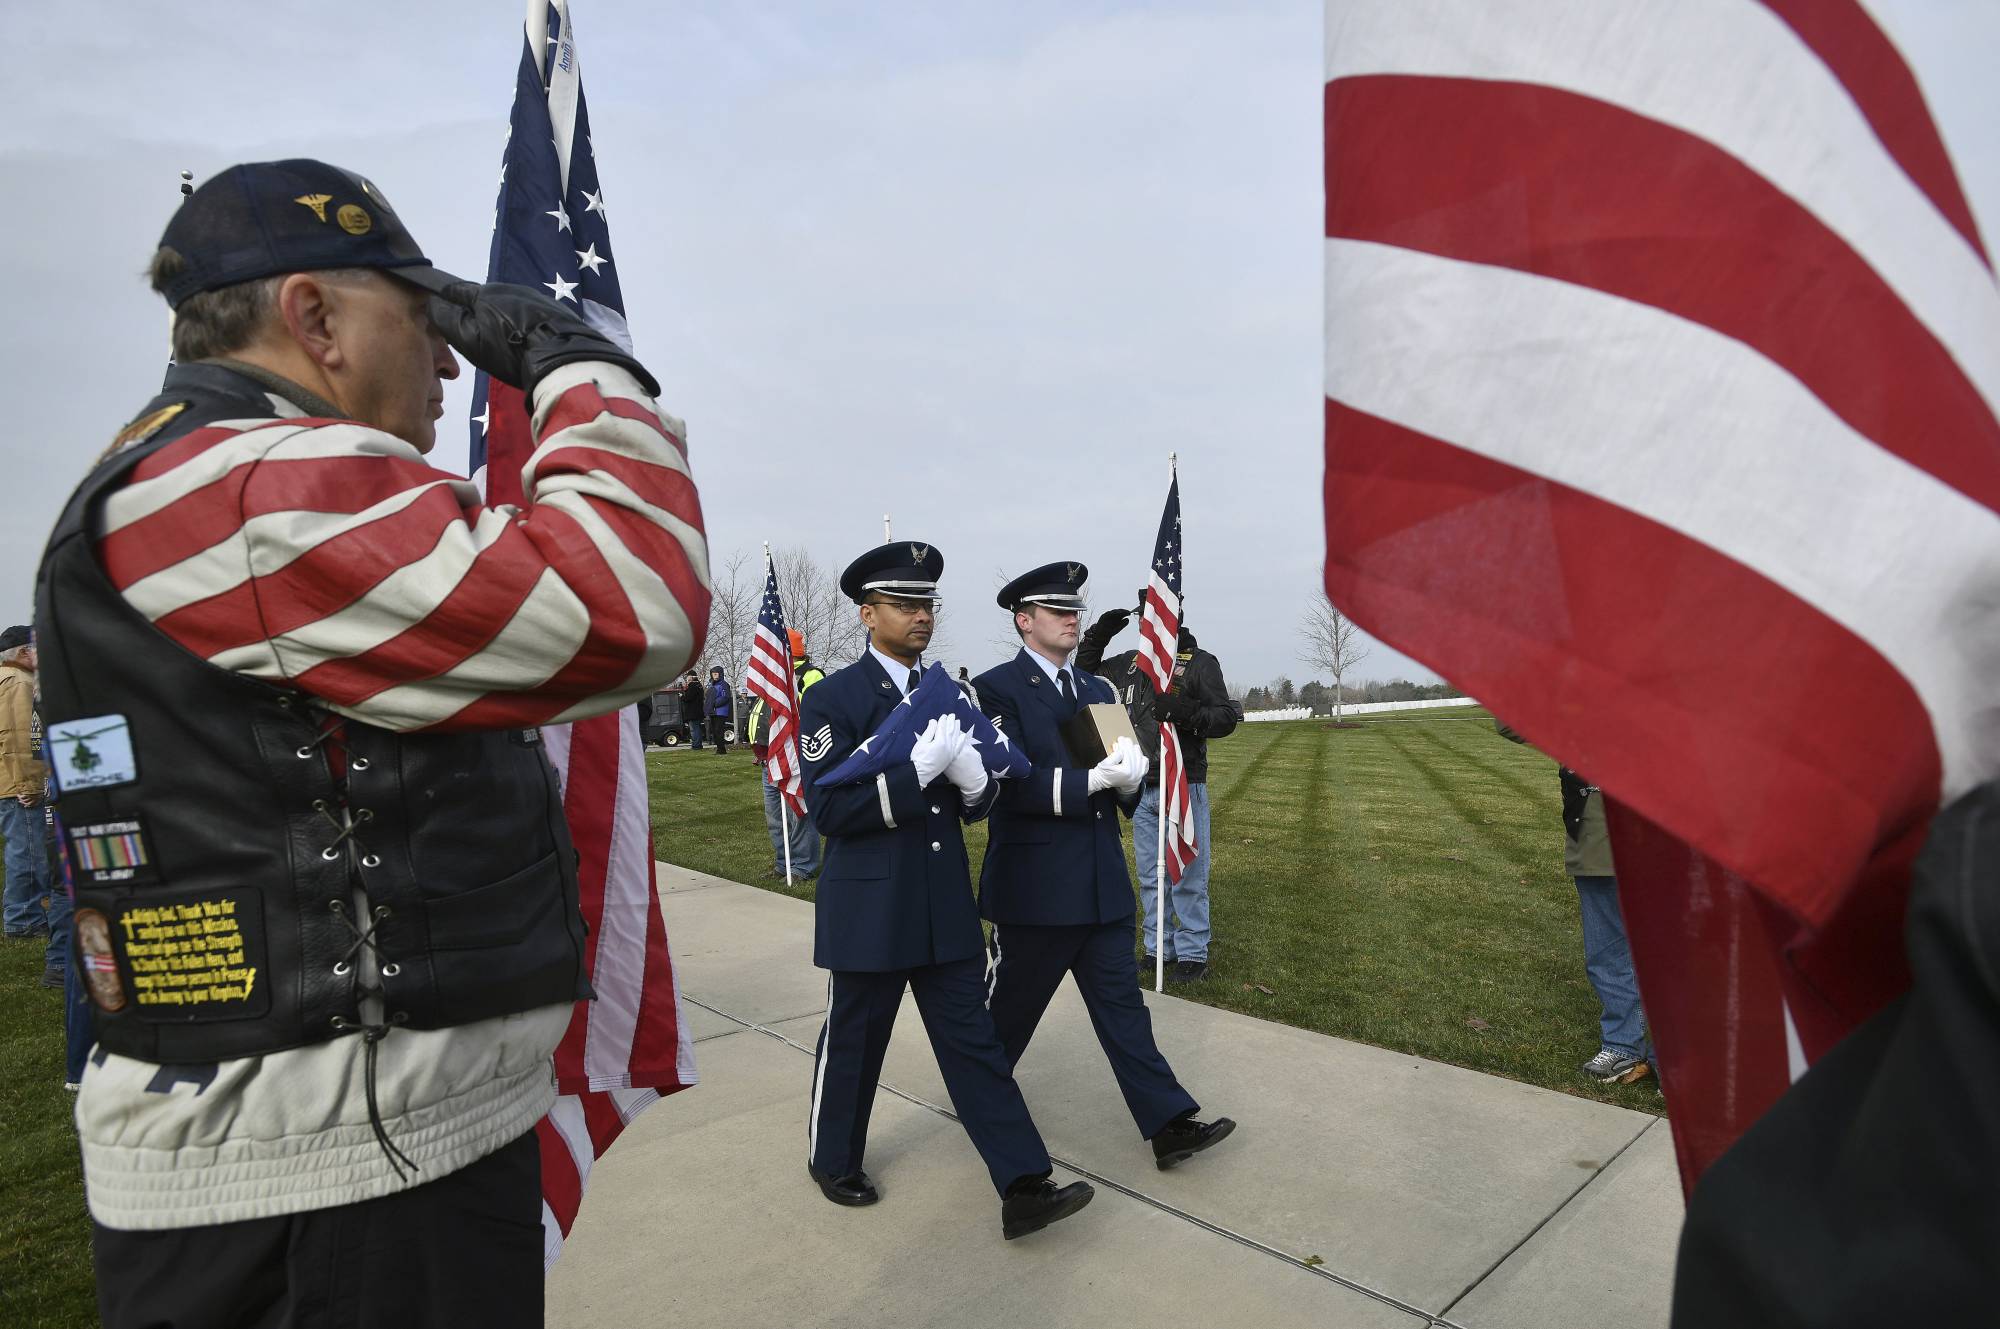 Honor guards from the US Air Force carry the creamated remains of veterans found at Cantrel Funeral home during a full military ceremony at the Great Lakes National Cemetery in Holly on Monday, Nov 12, 2018. About 20 Patriot Guard Riders lined the walk with flags for the ceremony. (Dale G.Young /Detroit News via AP)